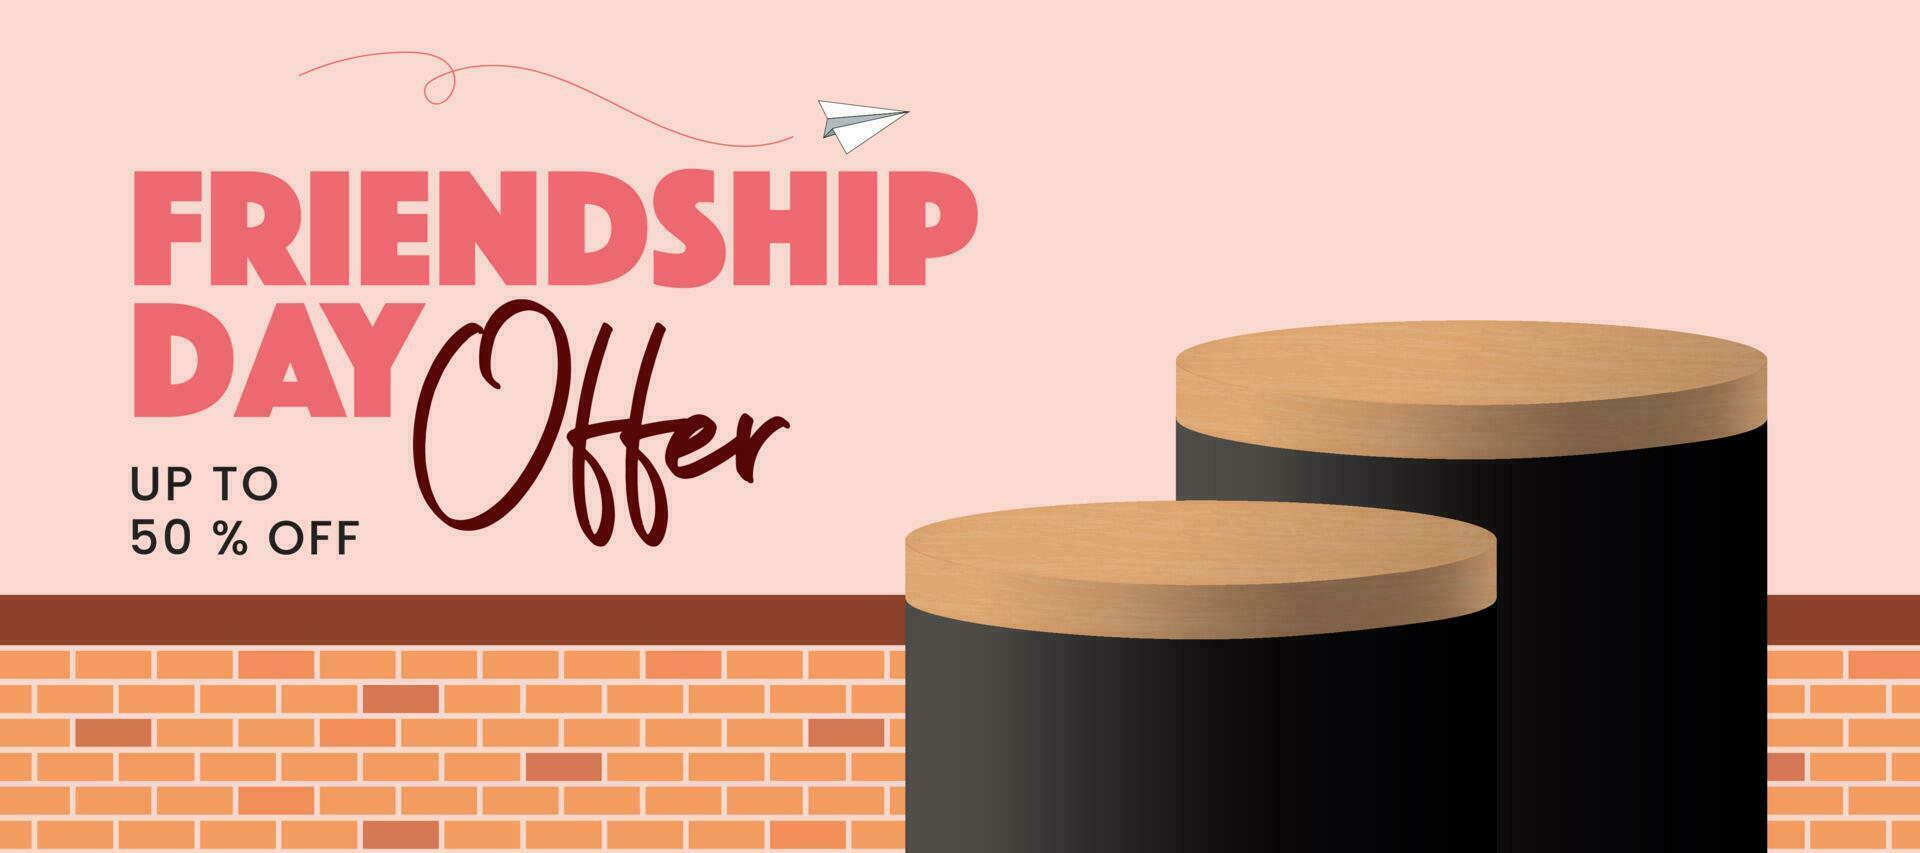 friendship day sale, offer banner template vector